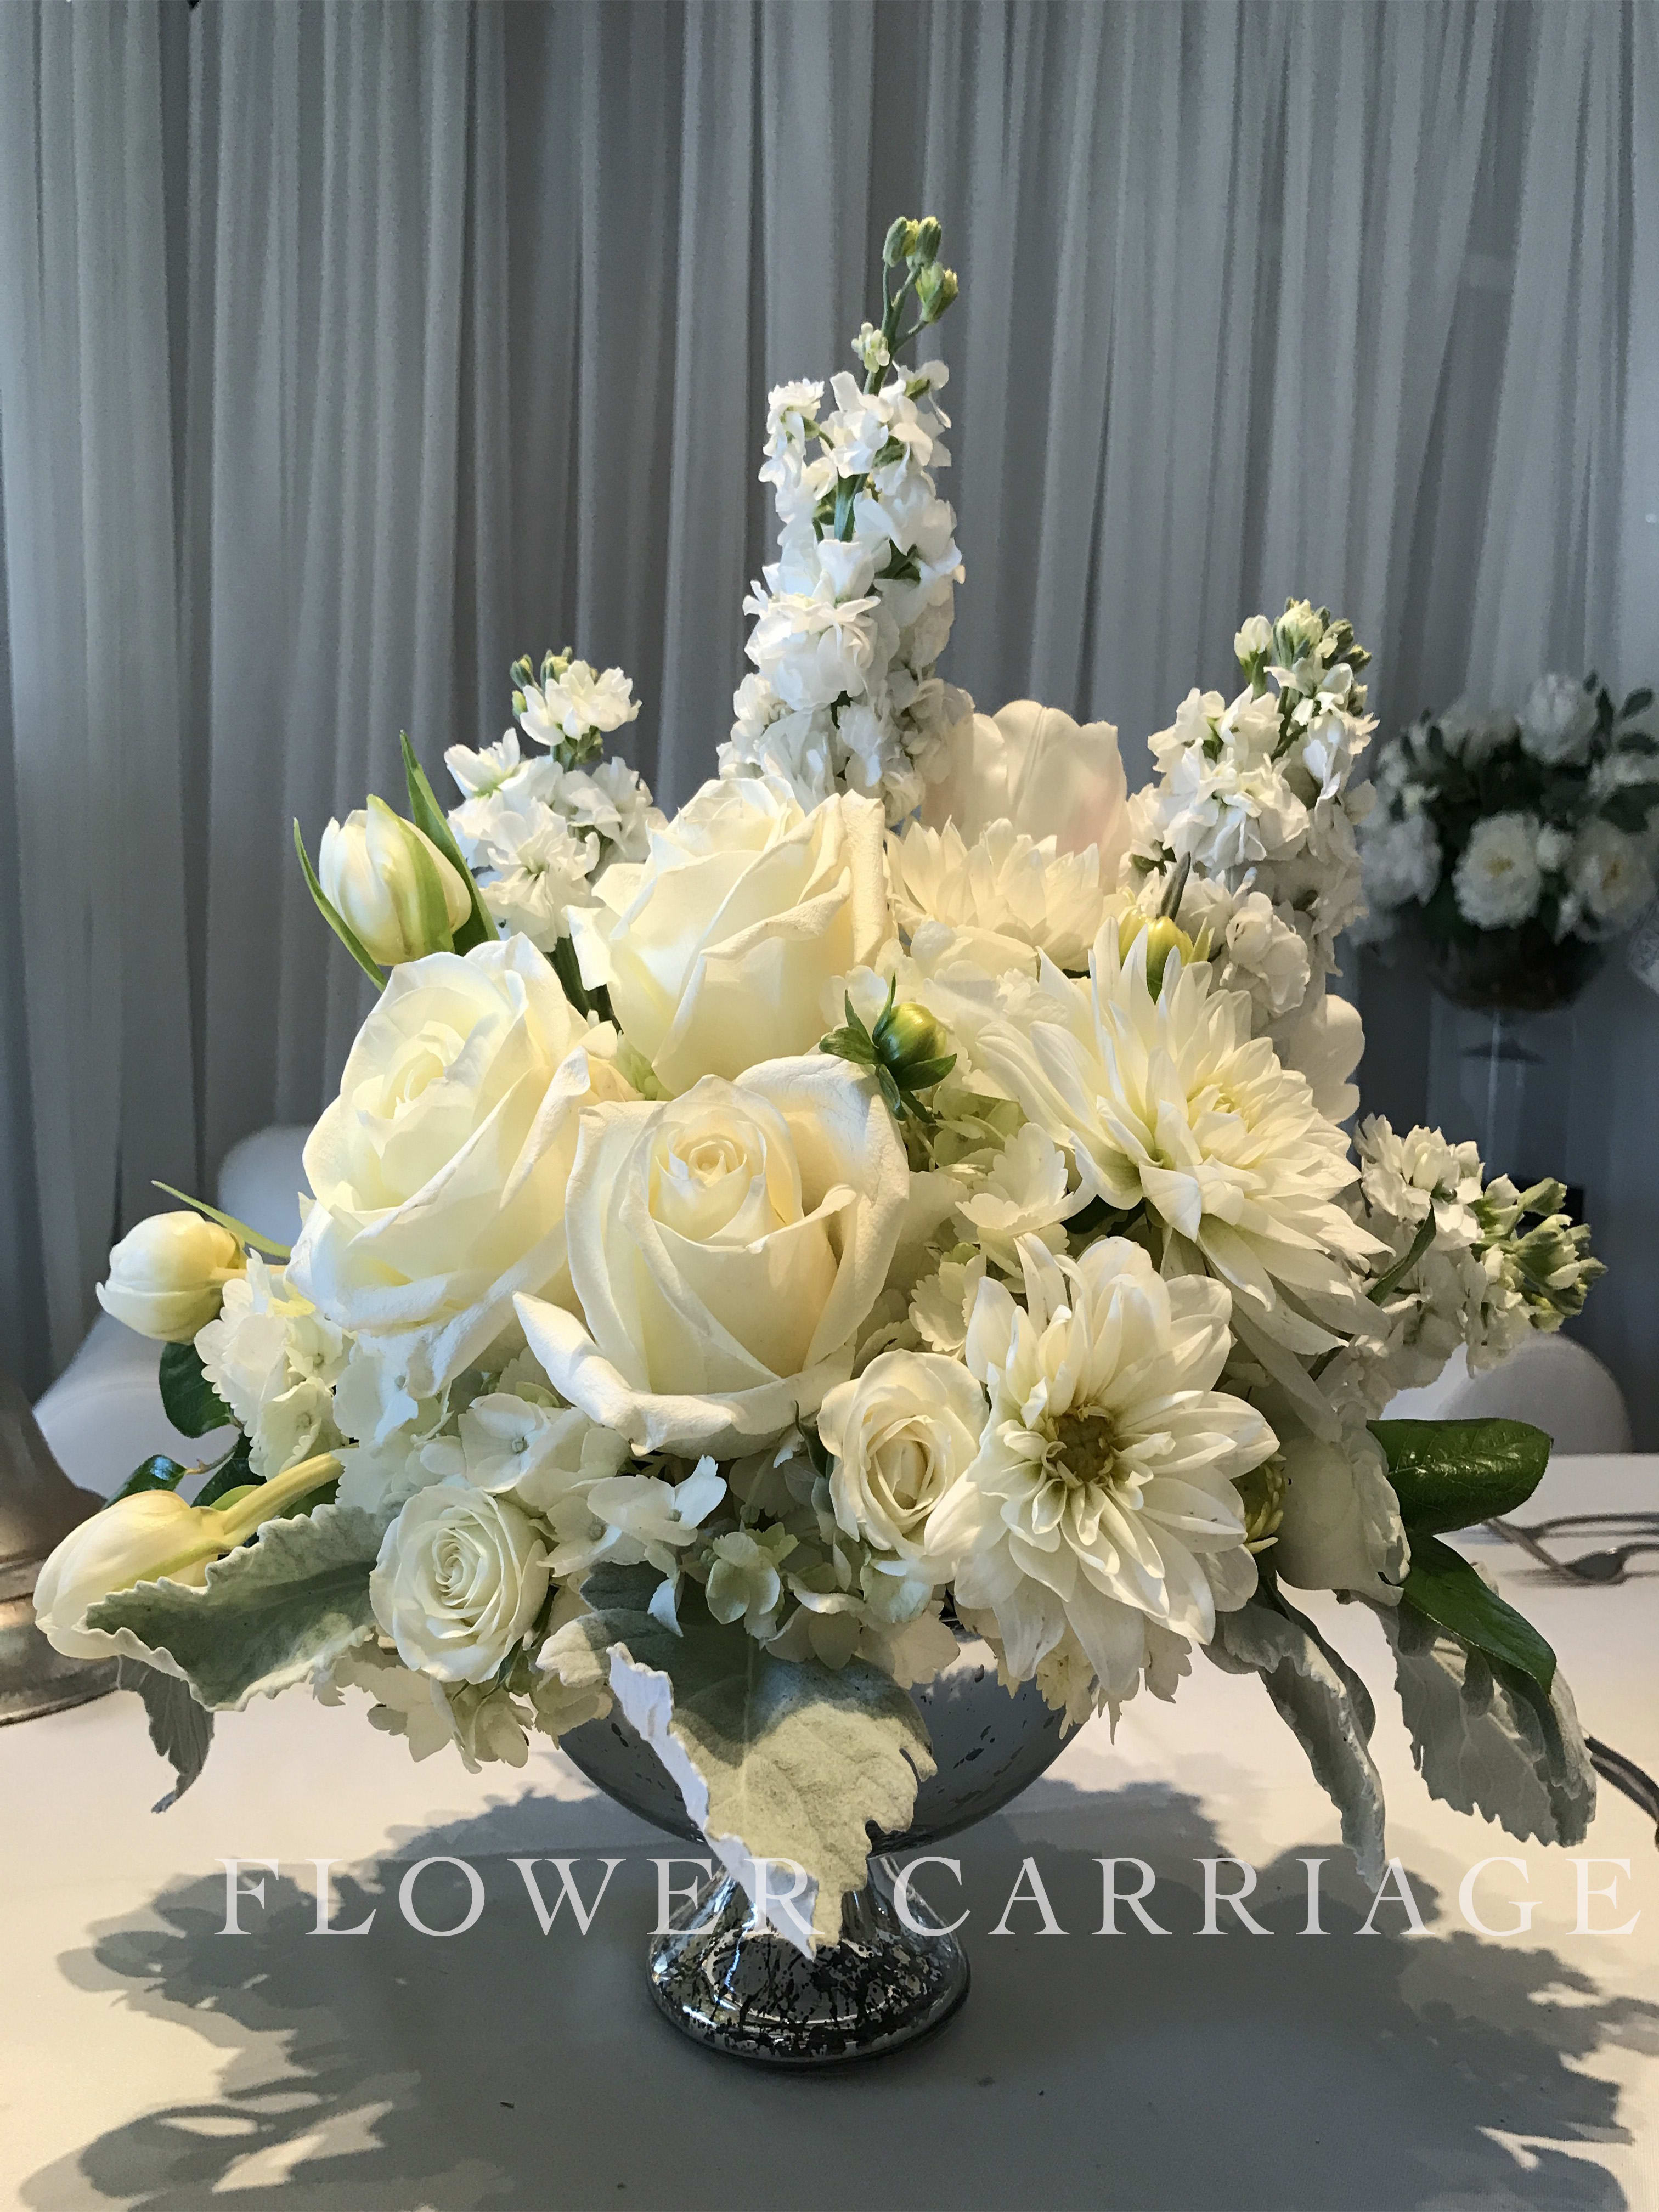 Pristine Whites Bouquet  - These flowers capture the essence of purity and innocence. They make an elegant centerpiece or a heartfelt sympathy arrangement.  This arrangement includes; Roses, Dahlia, Spray Roses, Tulips, Stock and more.